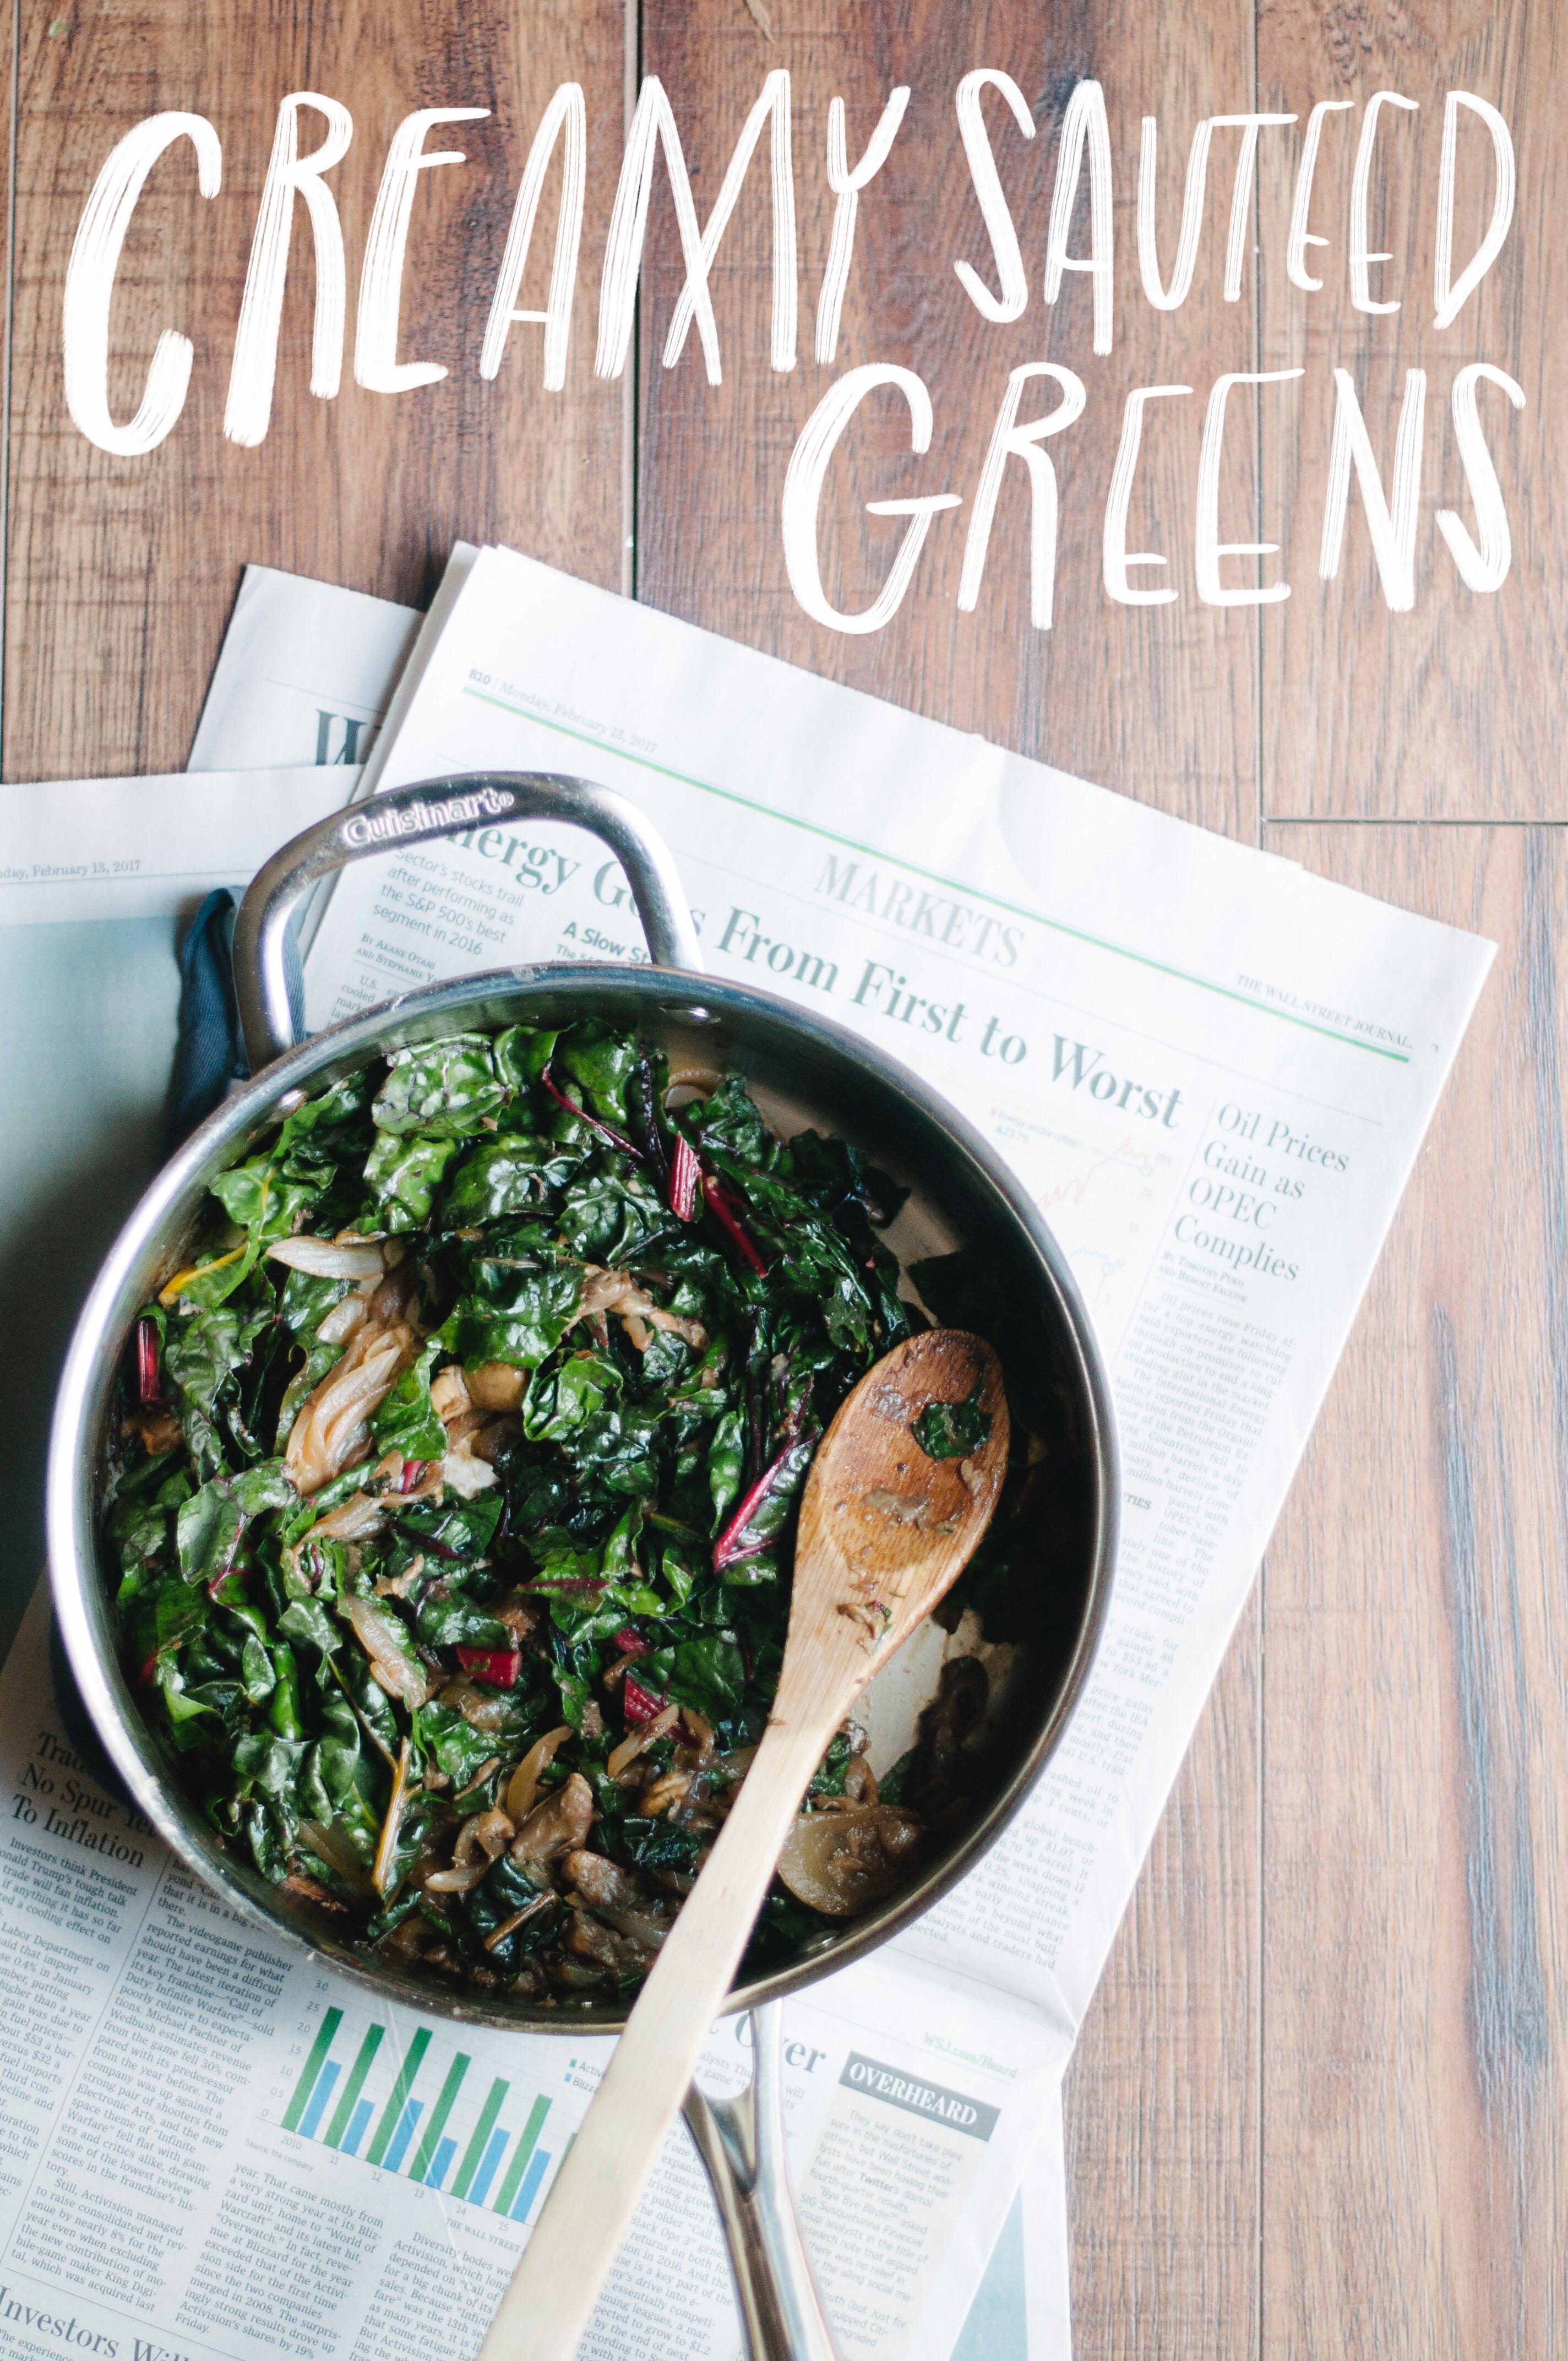 creamy vegan sauteed greens (get more greens in your diet!)